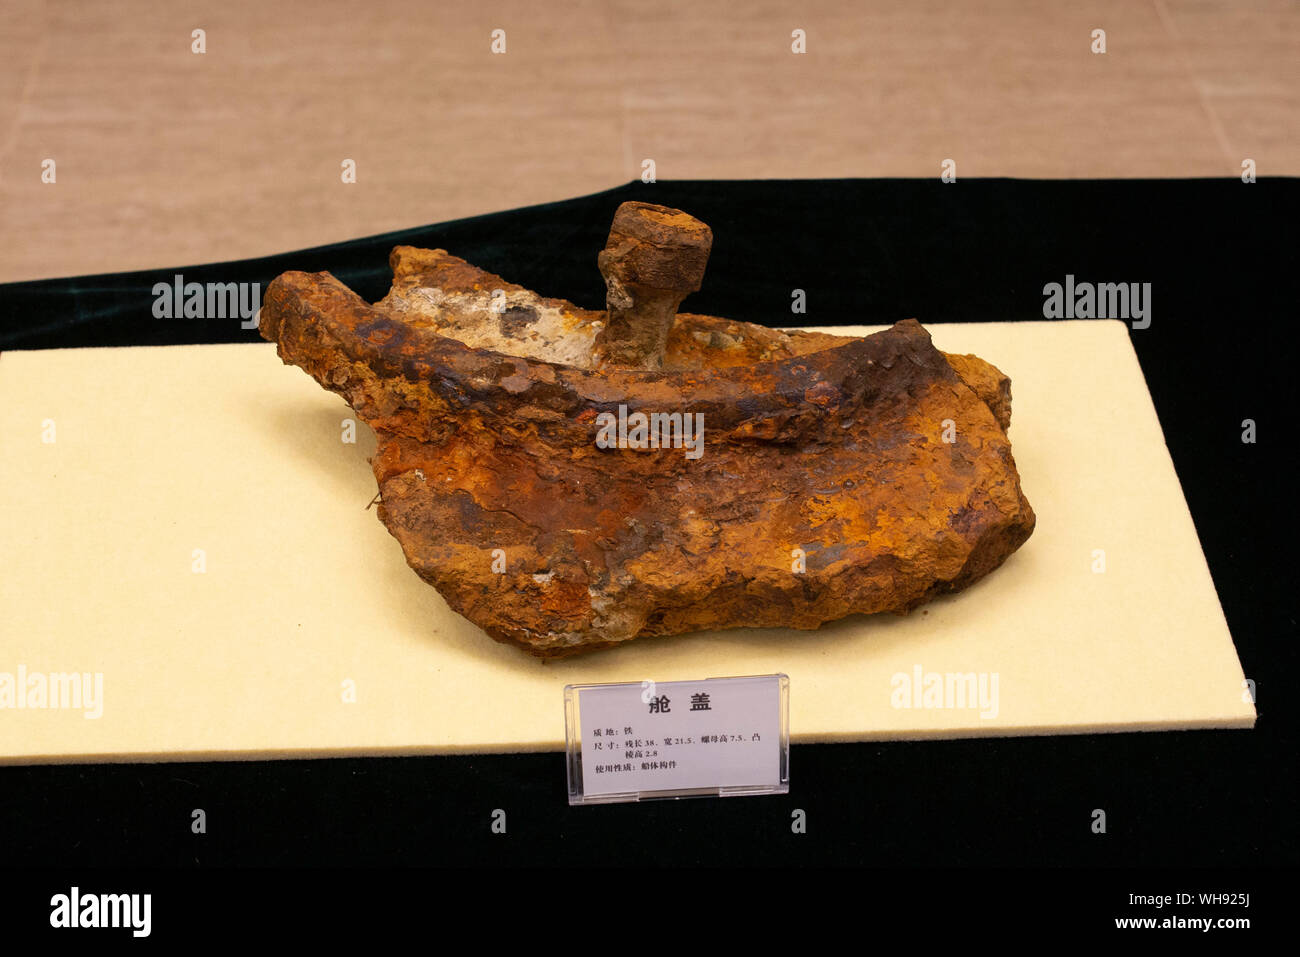 Weihai. 2nd Sep, 2019. Photo taken in east China's Shandong Province on Sept. 2, 2019 shows a piece of shipwrecked relic of the Dingyuan Battleship, the flagship vessel of the Beiyang Fleet of the Qing Dynasty (1644-1912) sunk in the First Sino-Japanese War. Chinese archeologists said Monday they have confirmed the wreck site of a Chinese battleship sunk in the Yellow Sea by the invading Japanese fleet in 1894. Credit: Wang Yang/Xinhua/Alamy Live News Stock Photo